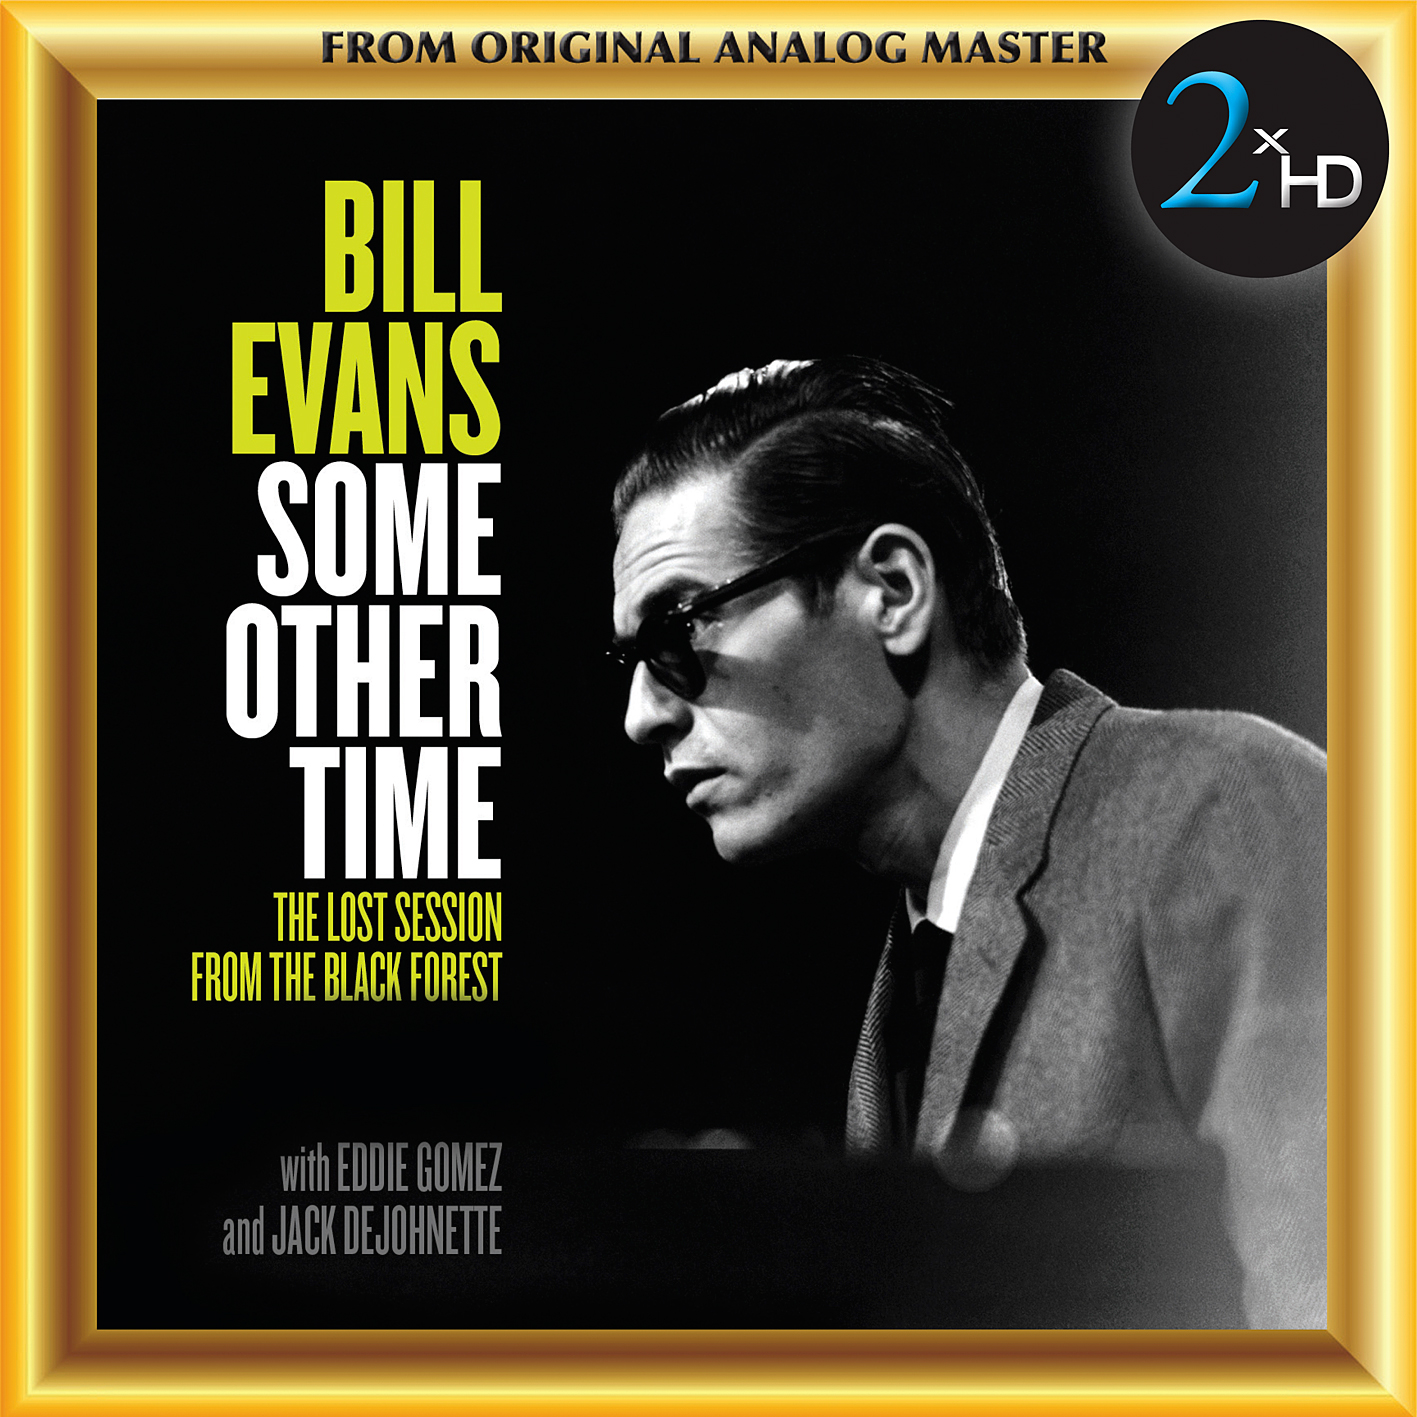 Bill Evans - Some Other Time: The Lost Session From The Black Forest (1968/2016) [HDTracks FLAC 24bit/192kHz]